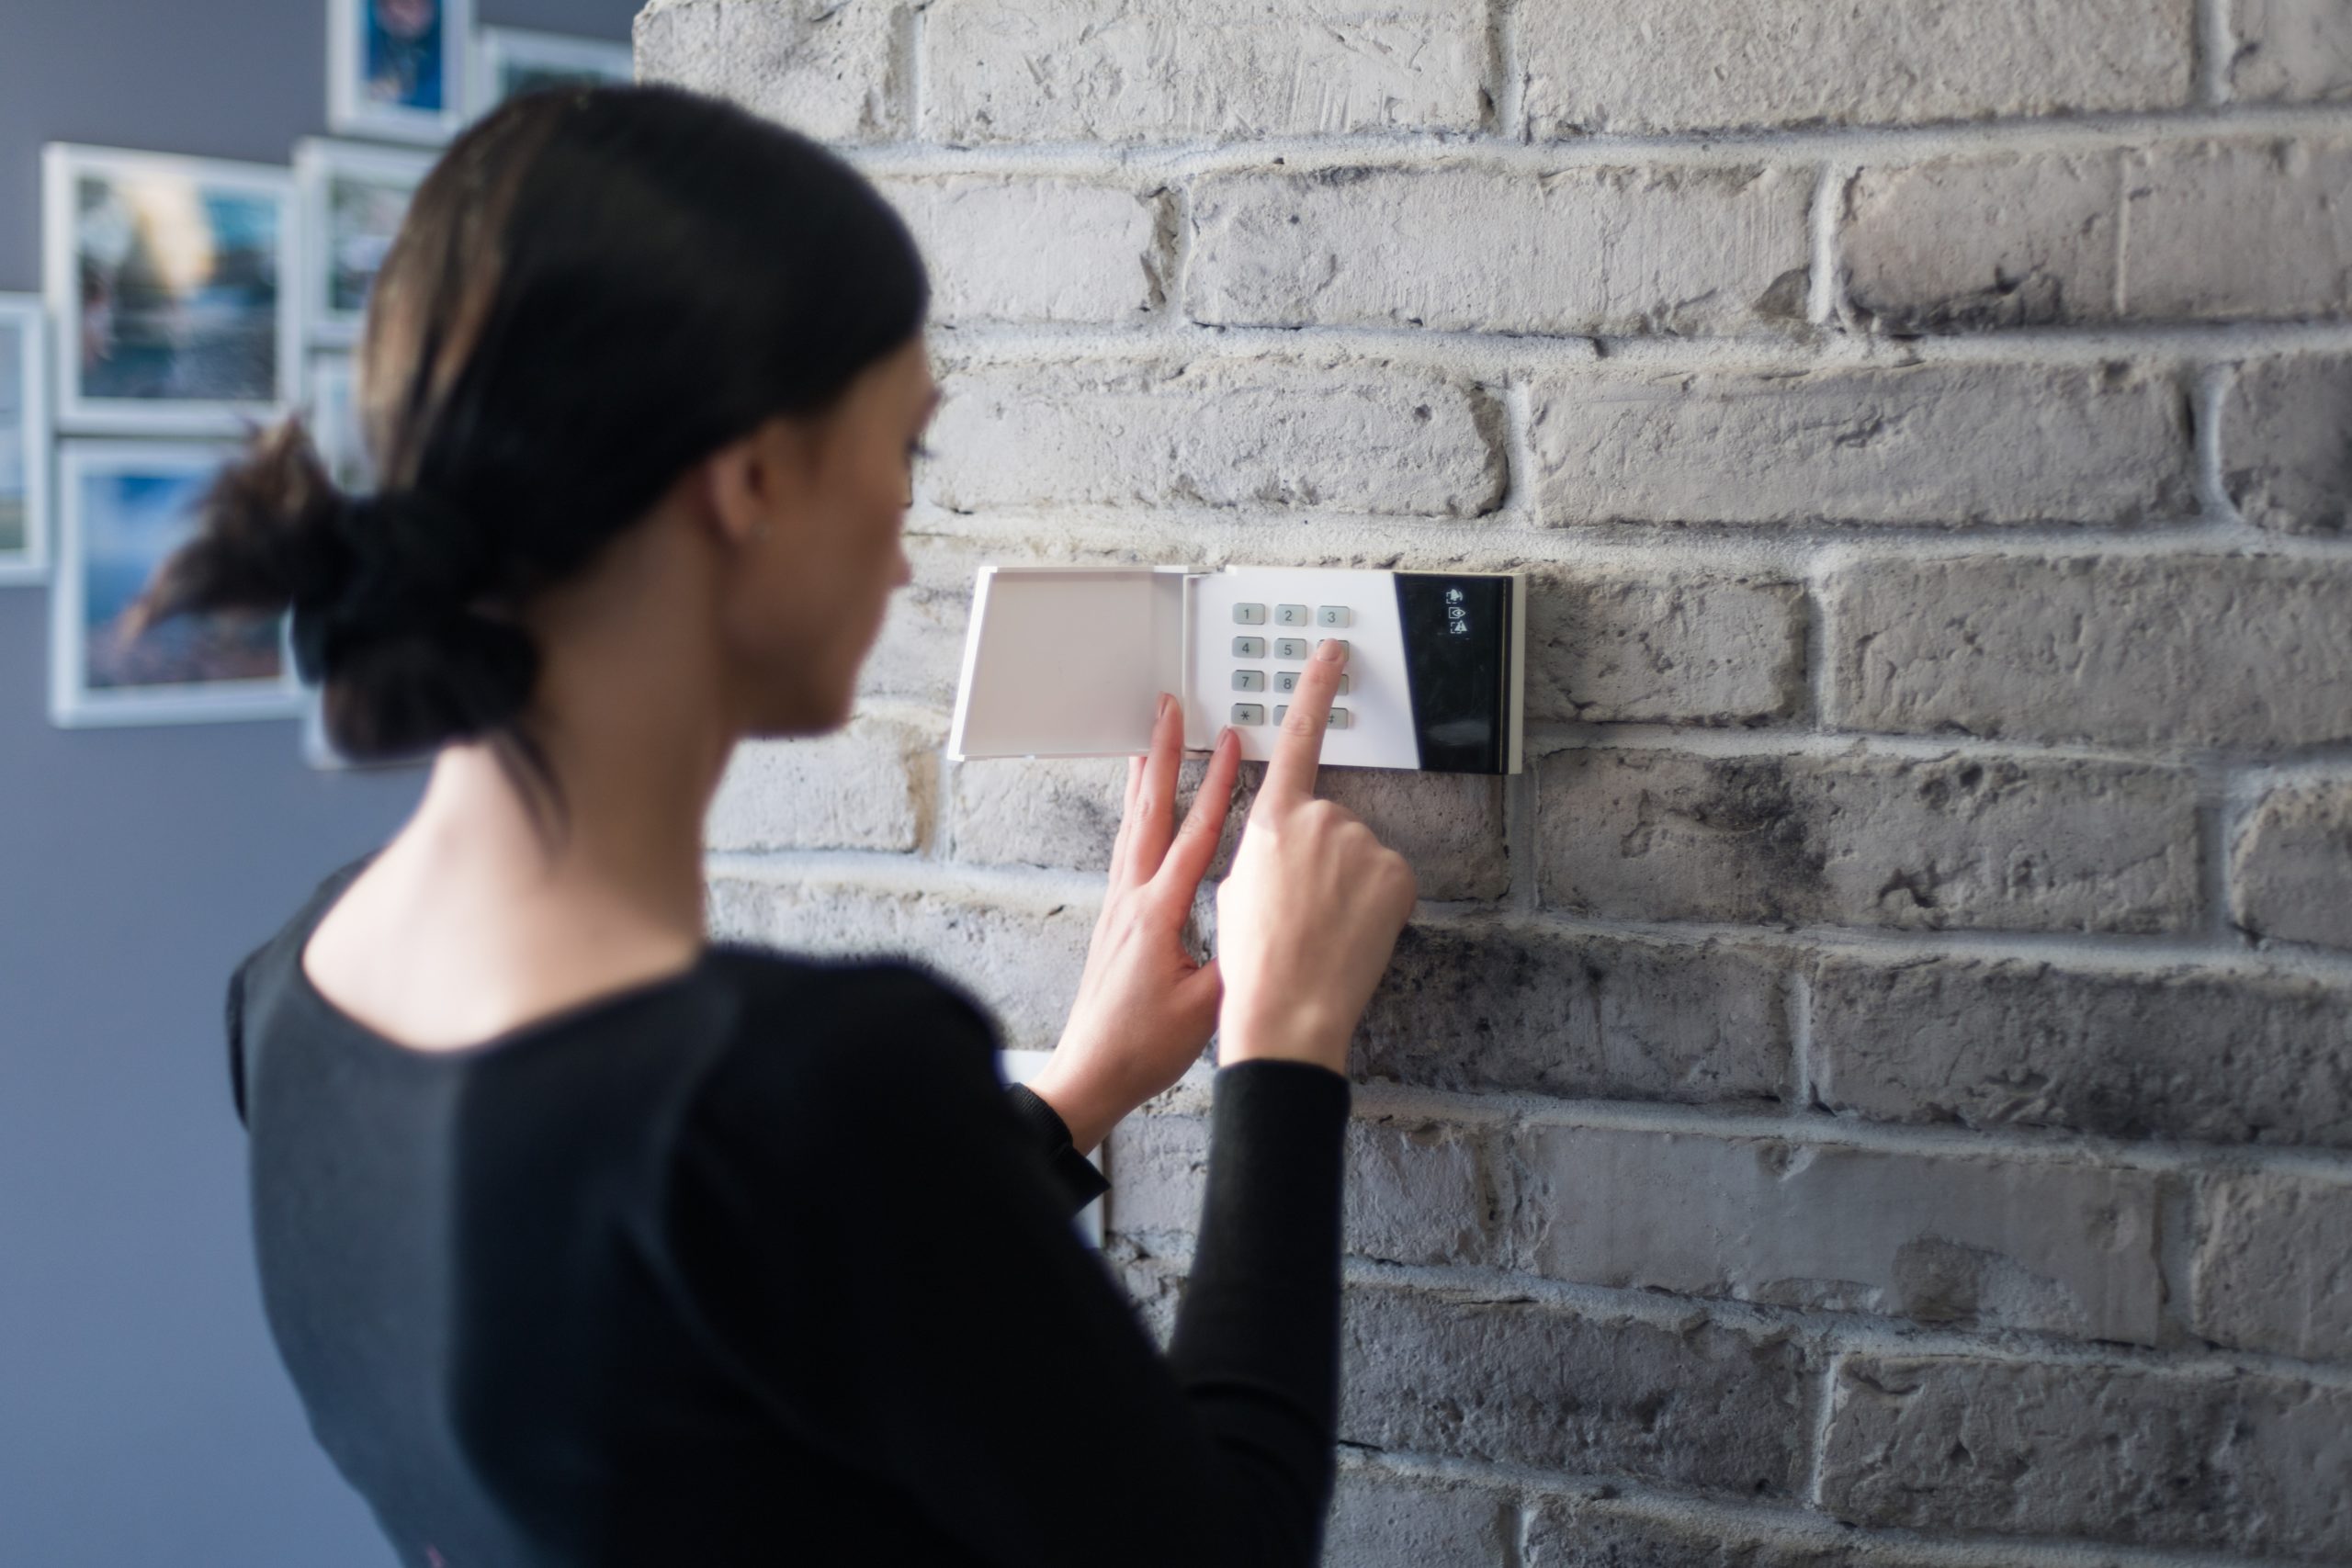 Woman operating an intruder alarm panel on a wall